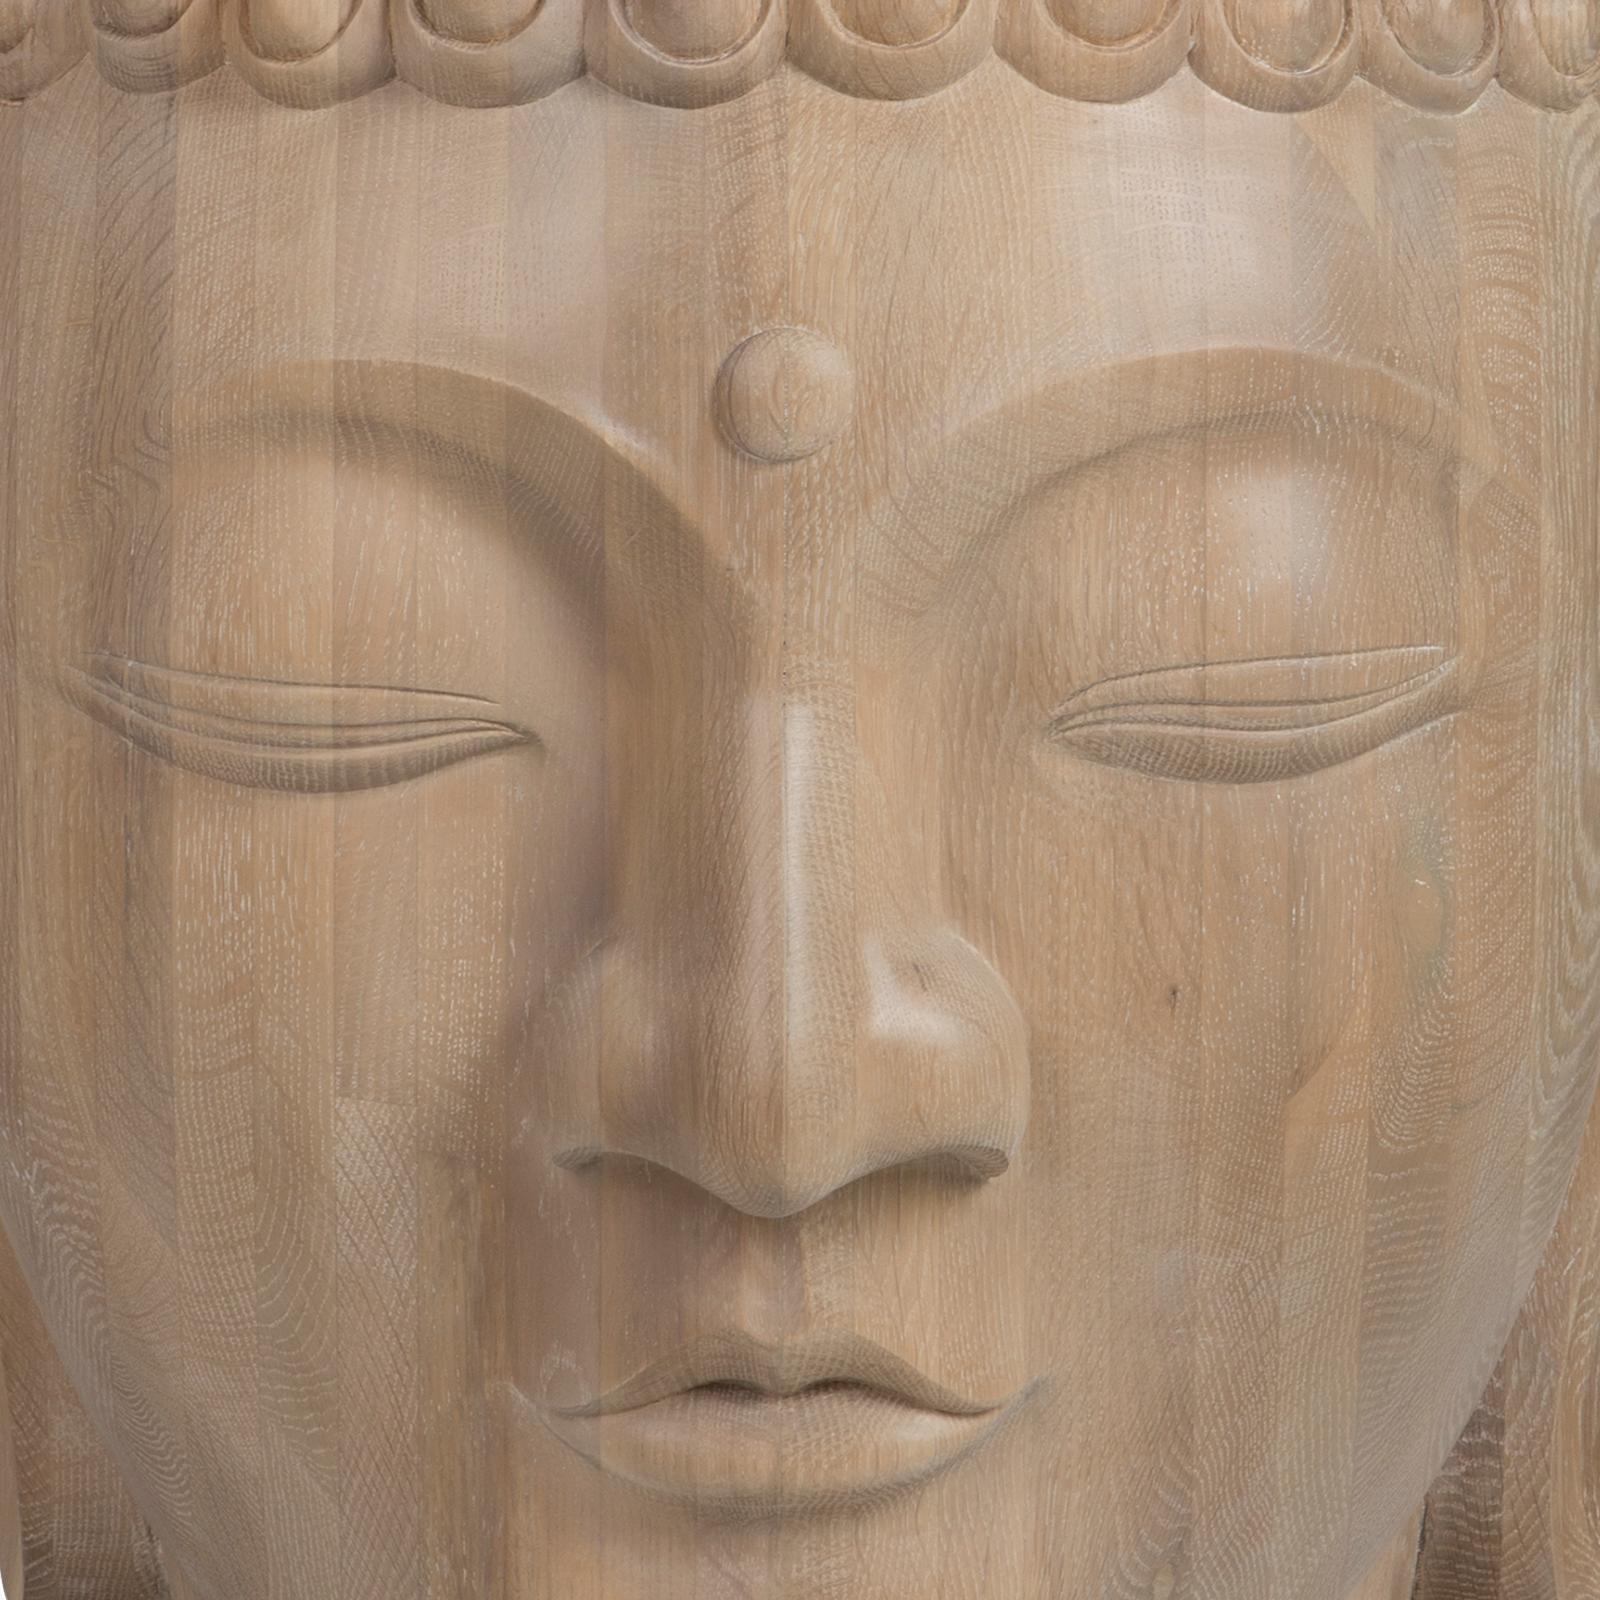 Hand-Carved Buddha Head Sculpture in Solid Oak